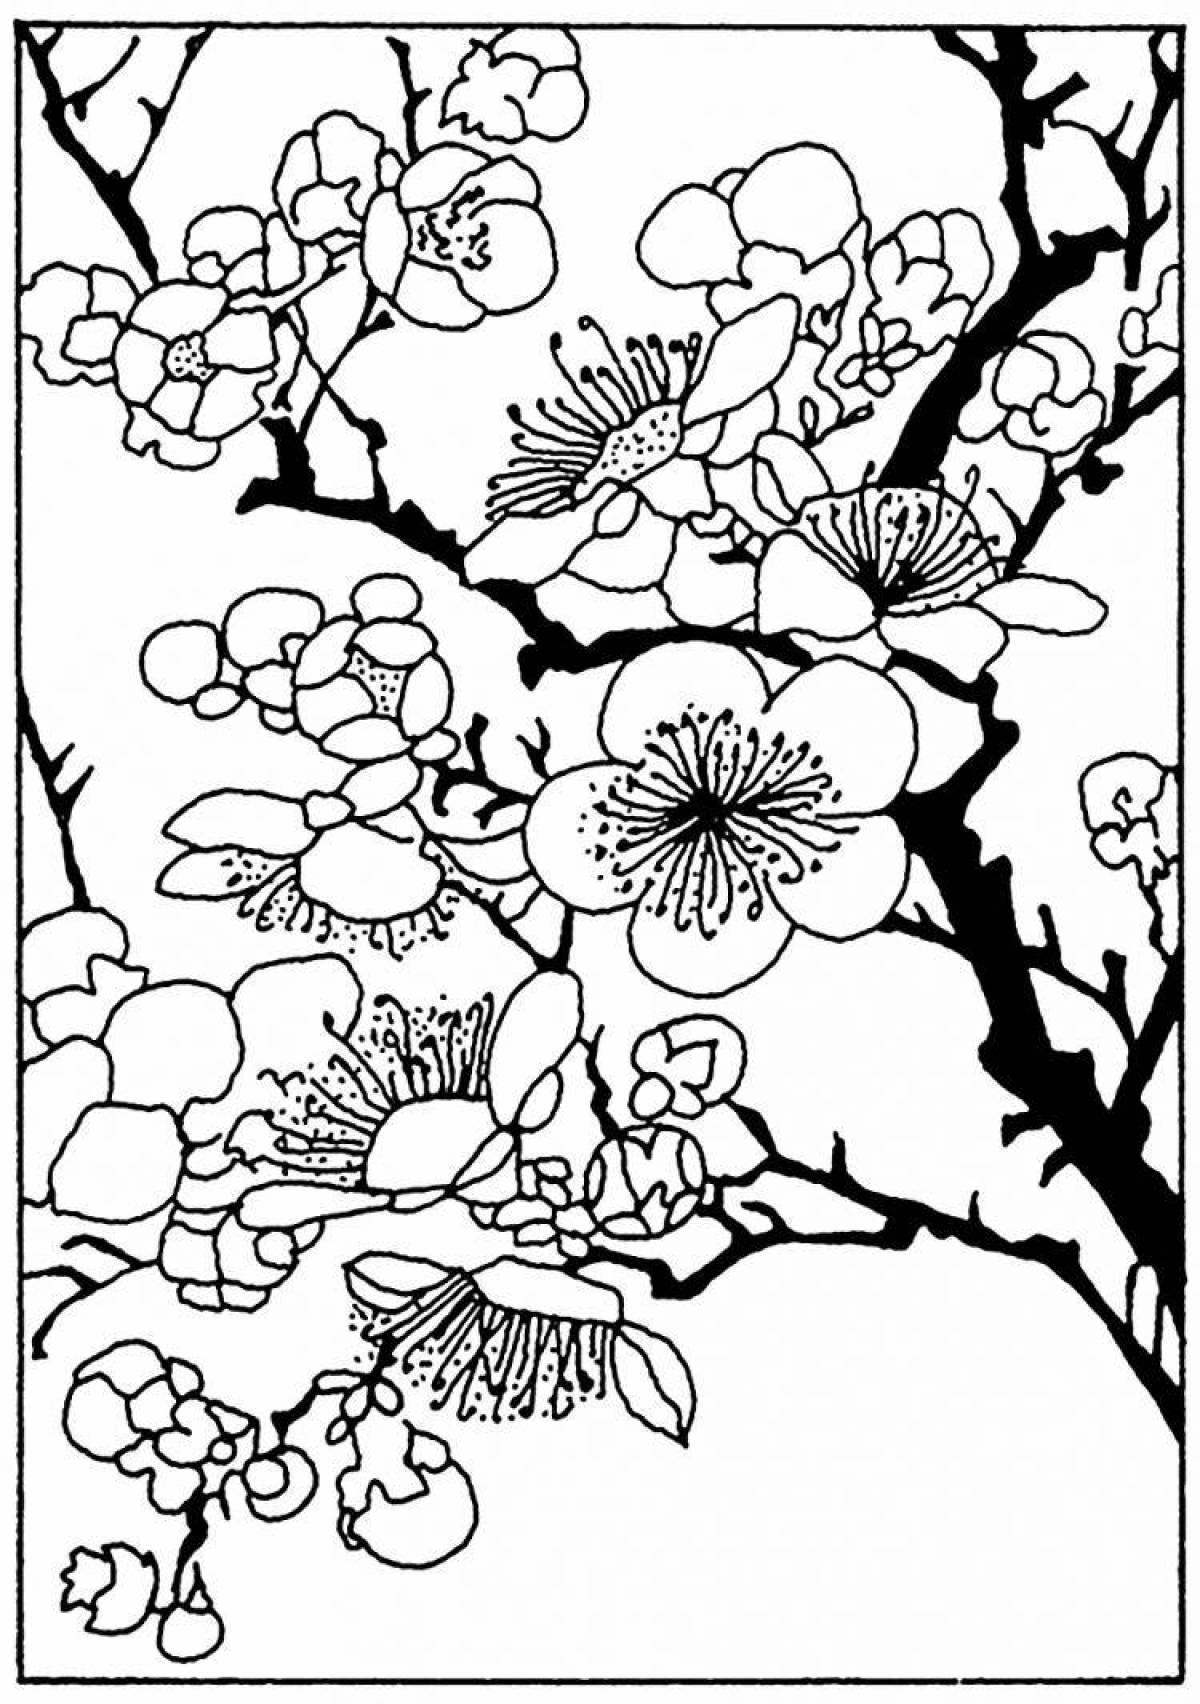 Attractive coloring book with Japanese motifs